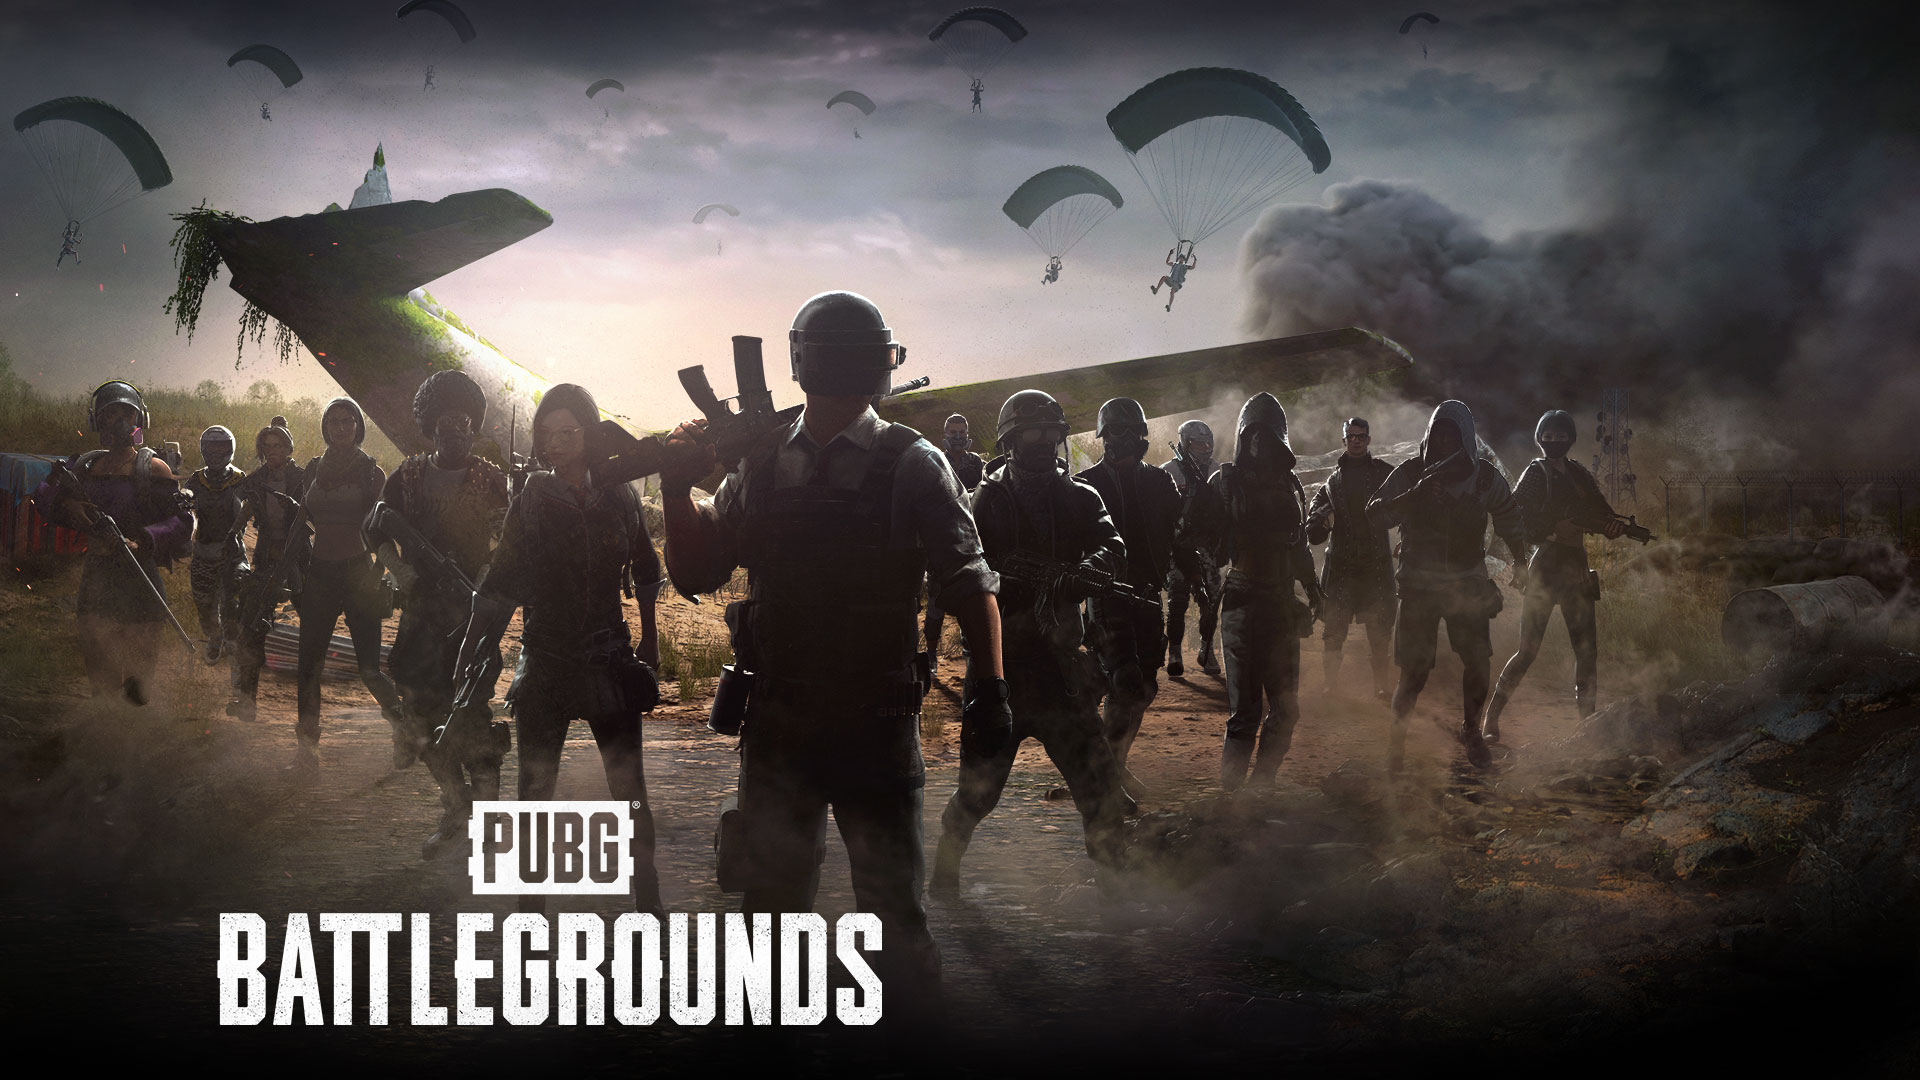 PUBG: Battlegrounds. A group of players gather around a crashed plane, while others drop in via parachutes.